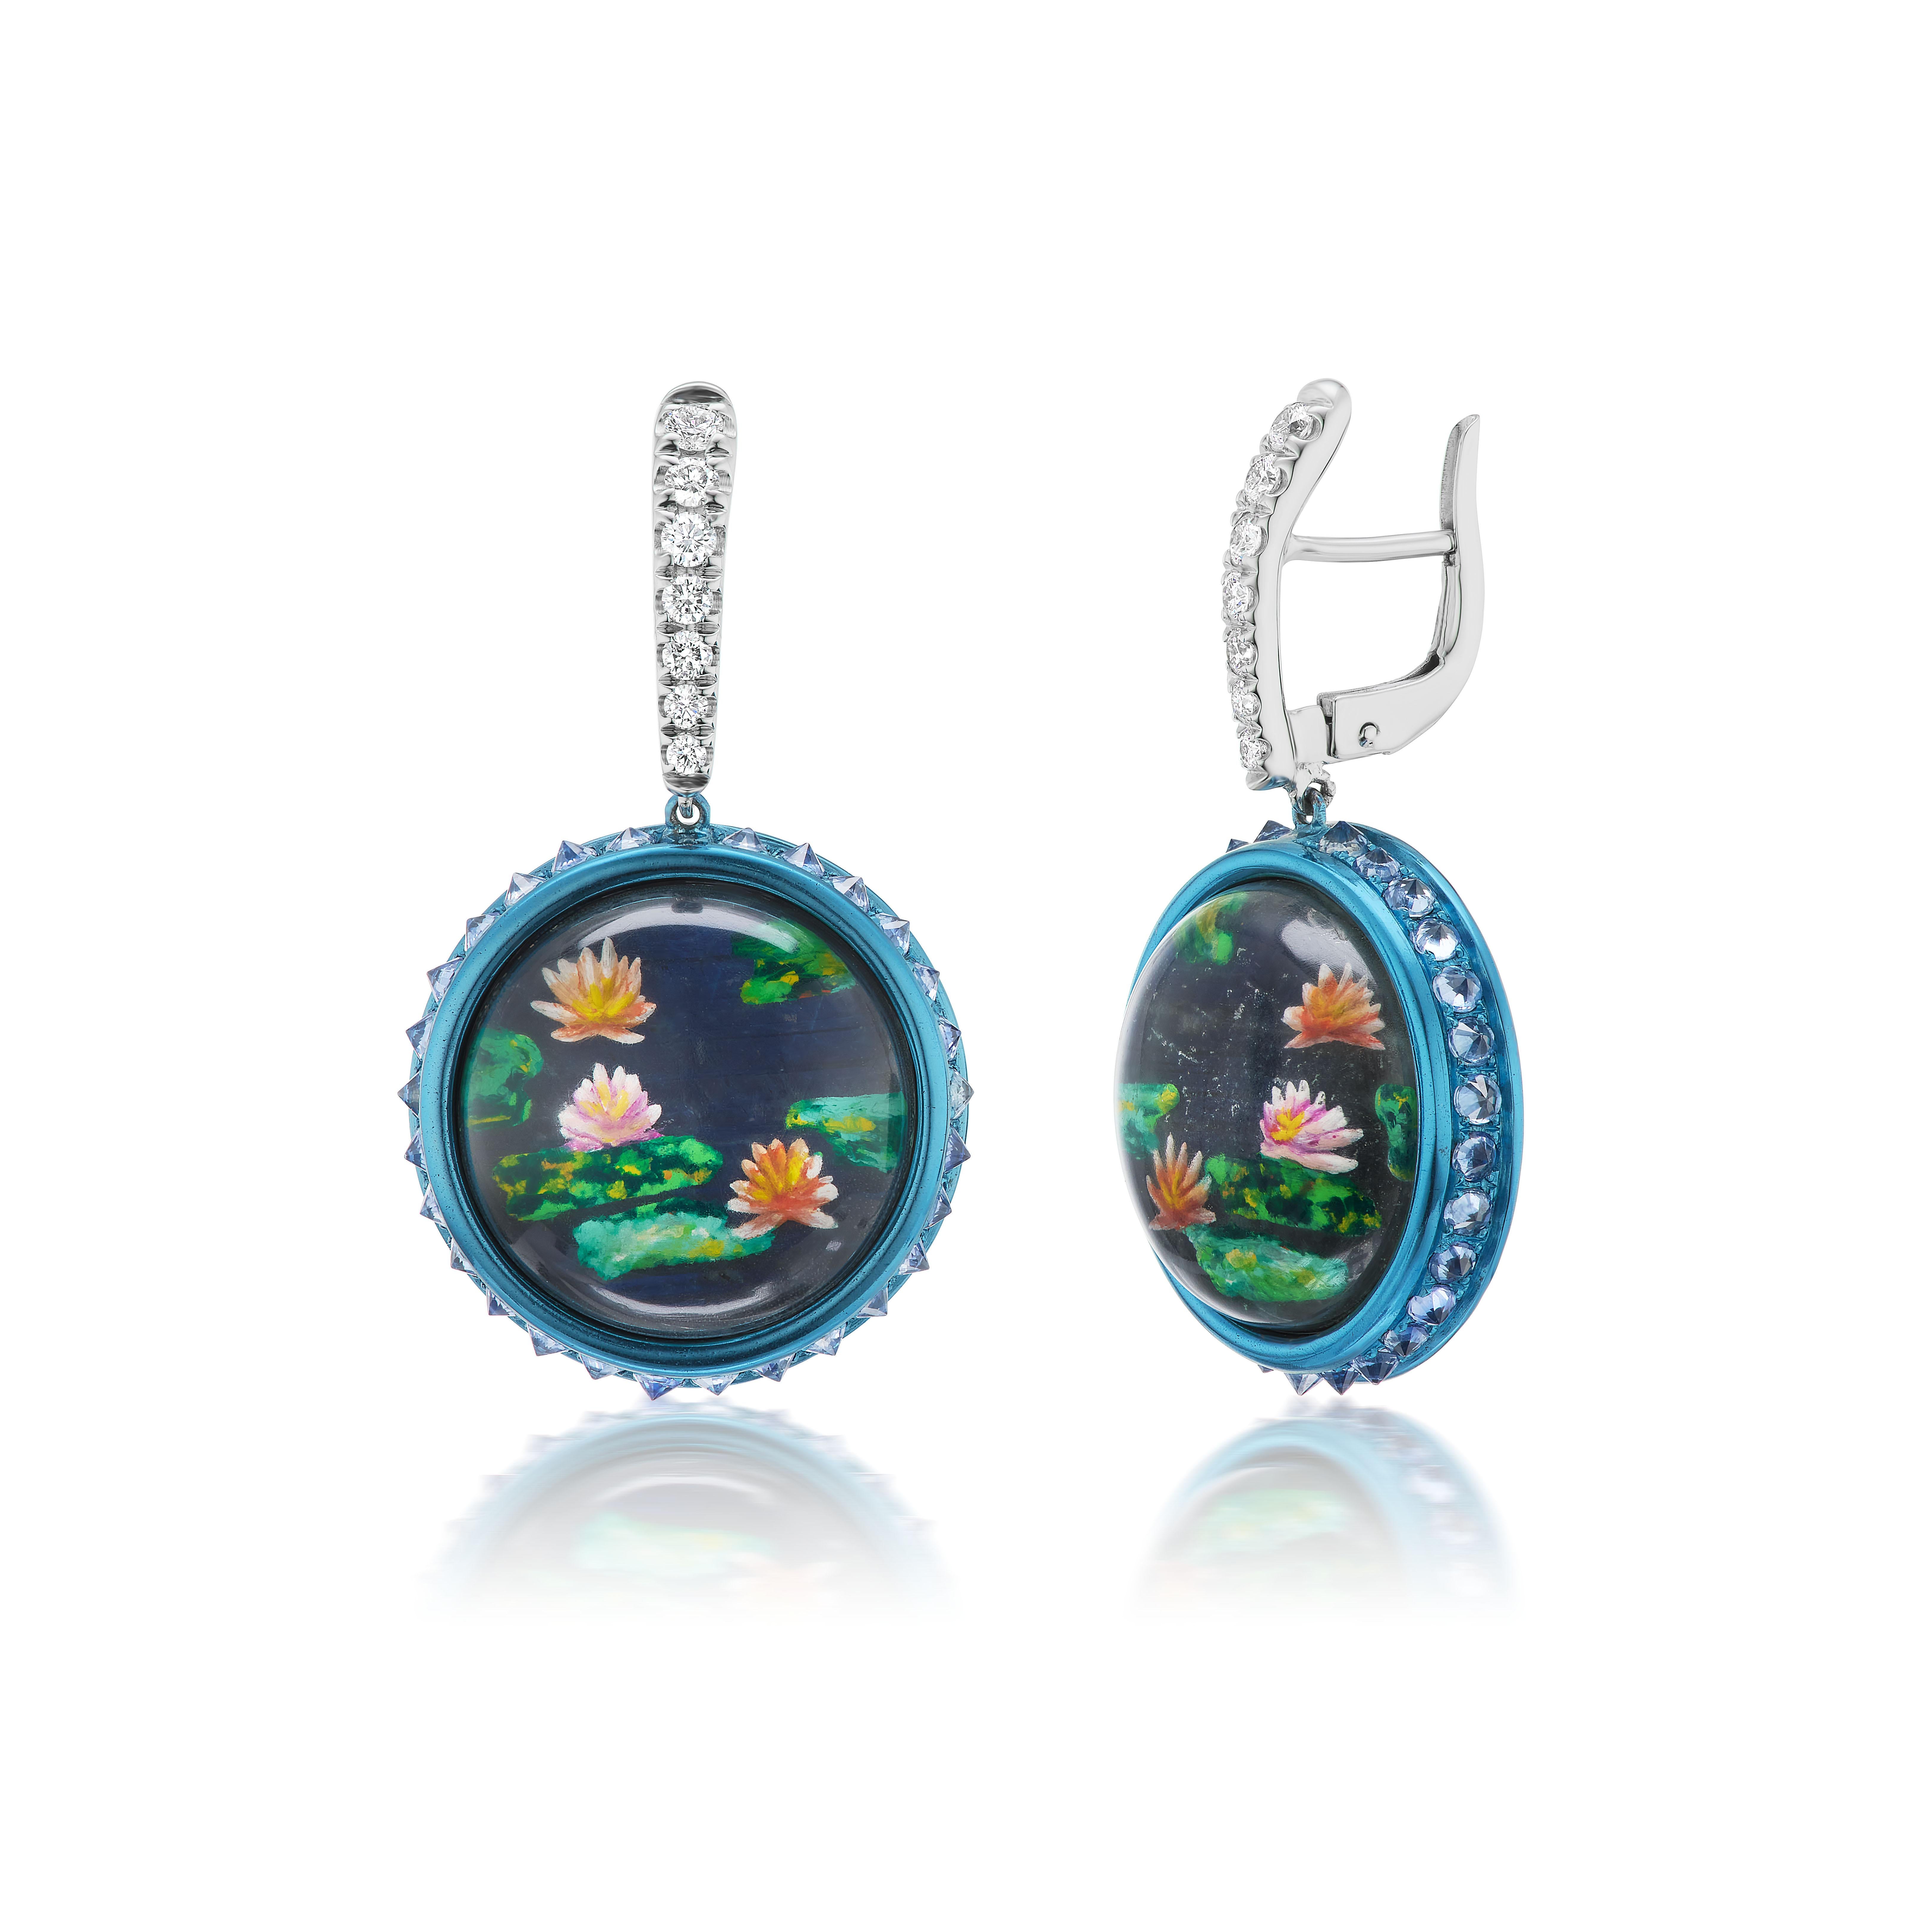 Claude Monet's paintings of water lilies are the iconic image of Impressionism and these modern earrings are themselves a work of art.  As a tribute to Monet, the painting is done utilizing the centuries old Essex crystal technique in which the rock